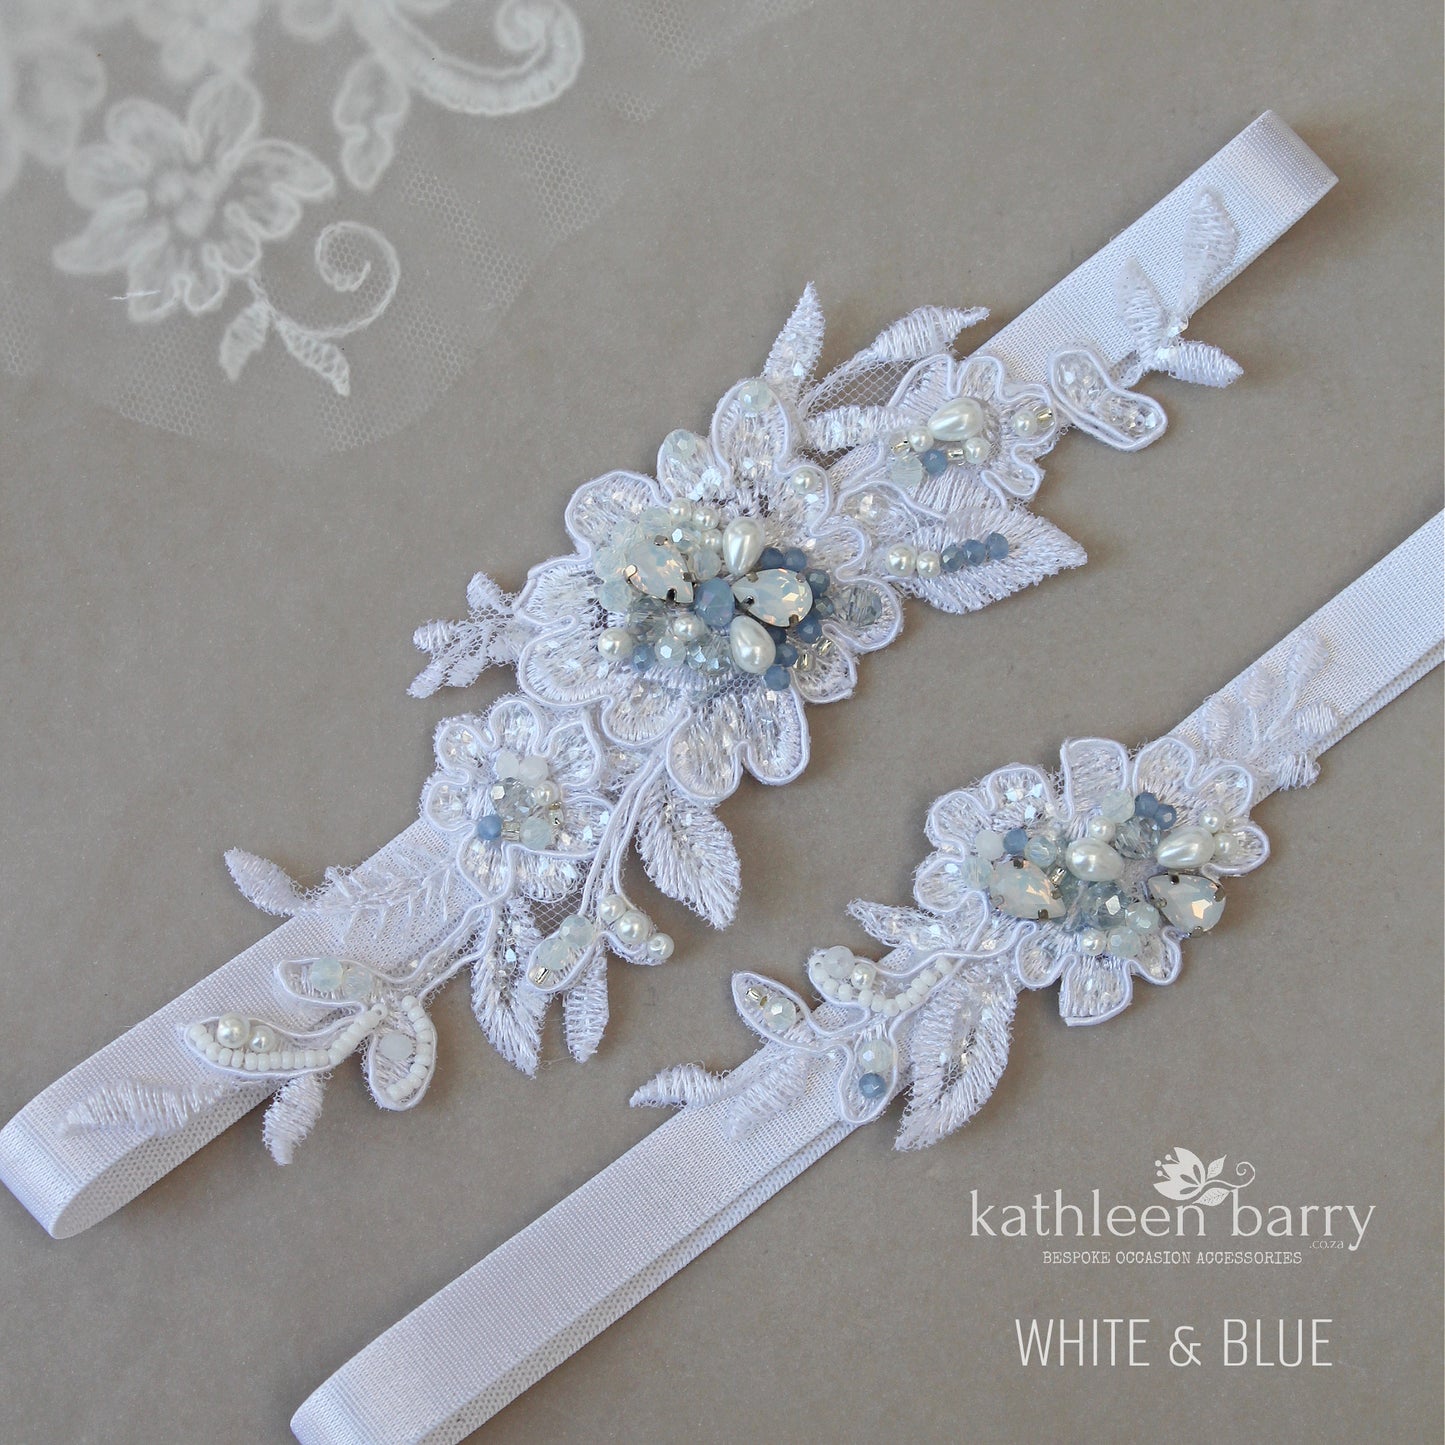 Larissa herloom Lacel garter set of two or individually - Opalescent Rhinestone, crystal and pearl FROM